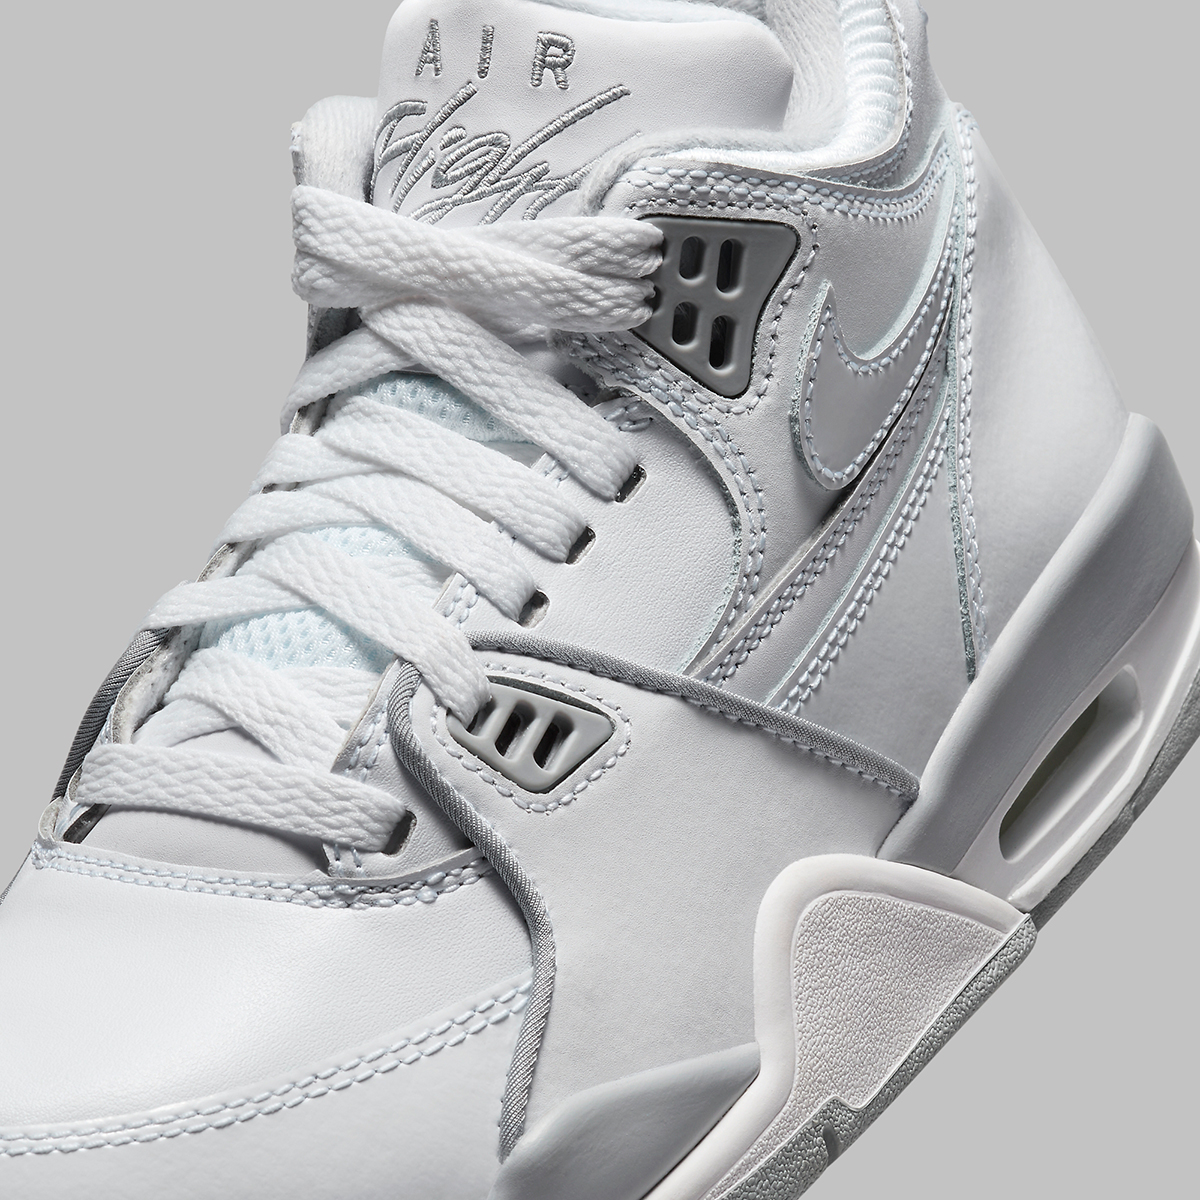 nike lebron james launch together commercial Grey White Hf0406 100 9